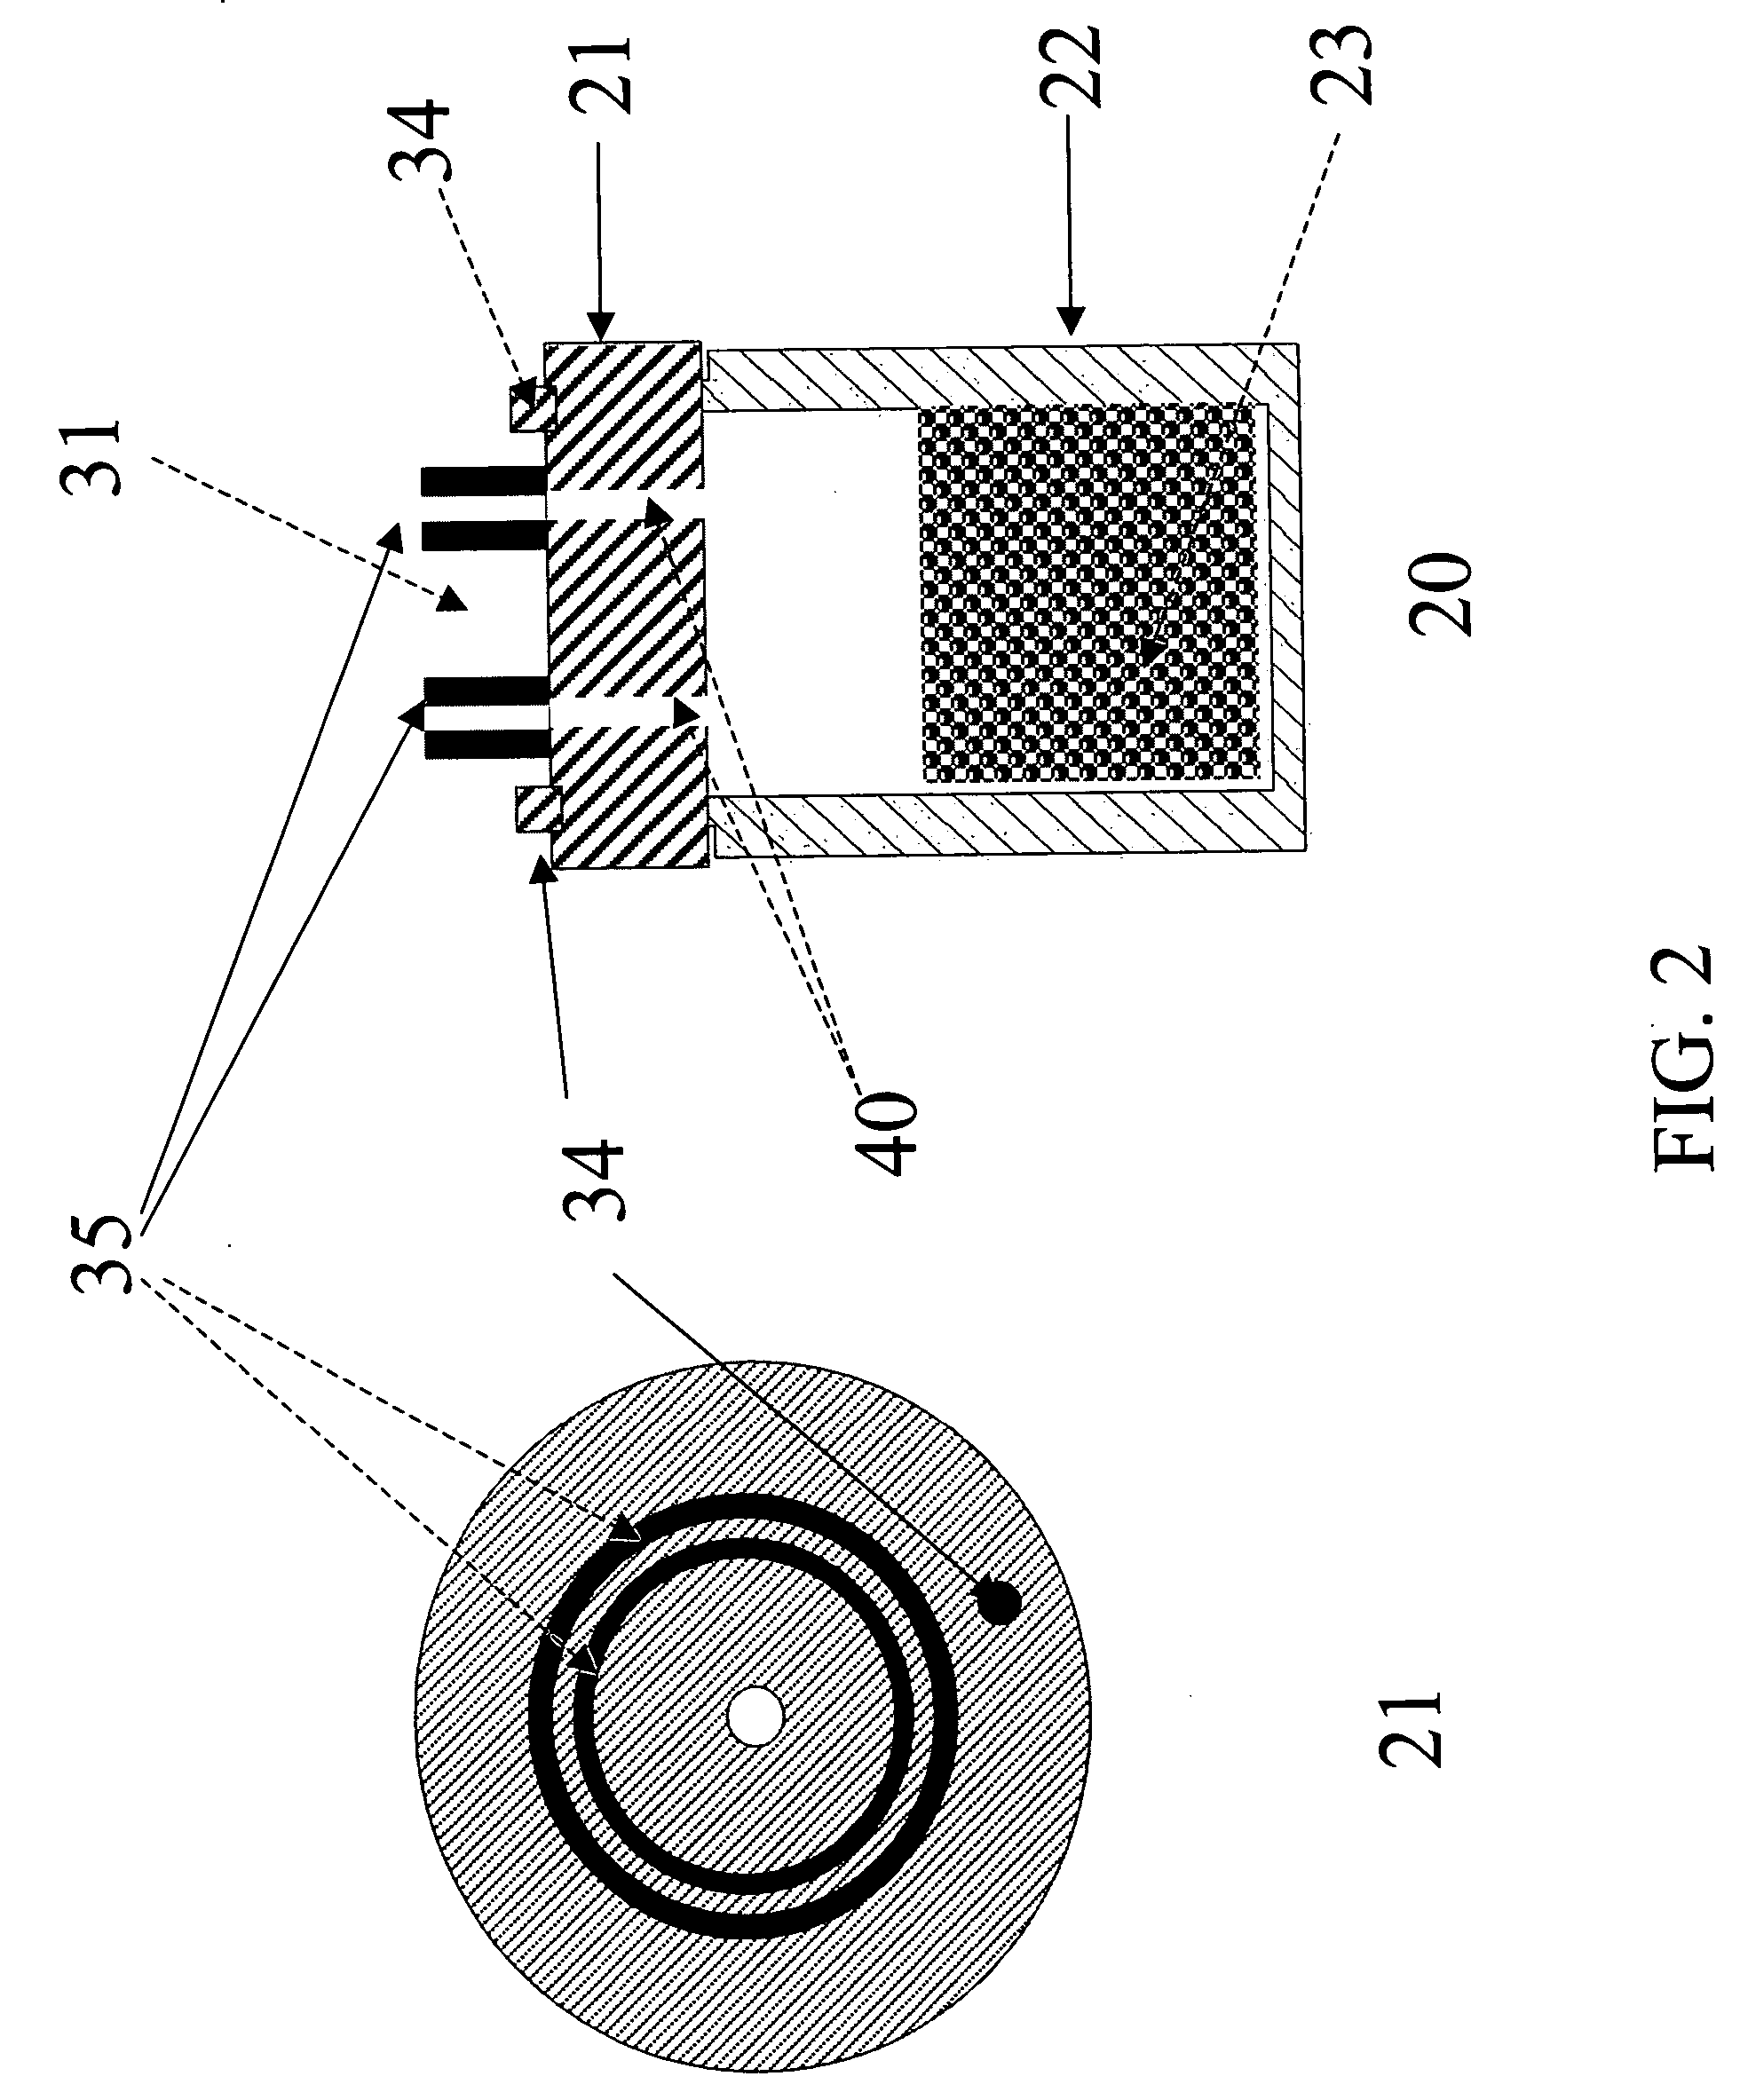 Replaceable electrostatically sprayable material reservoir design having electrostatic spraying and method for using same